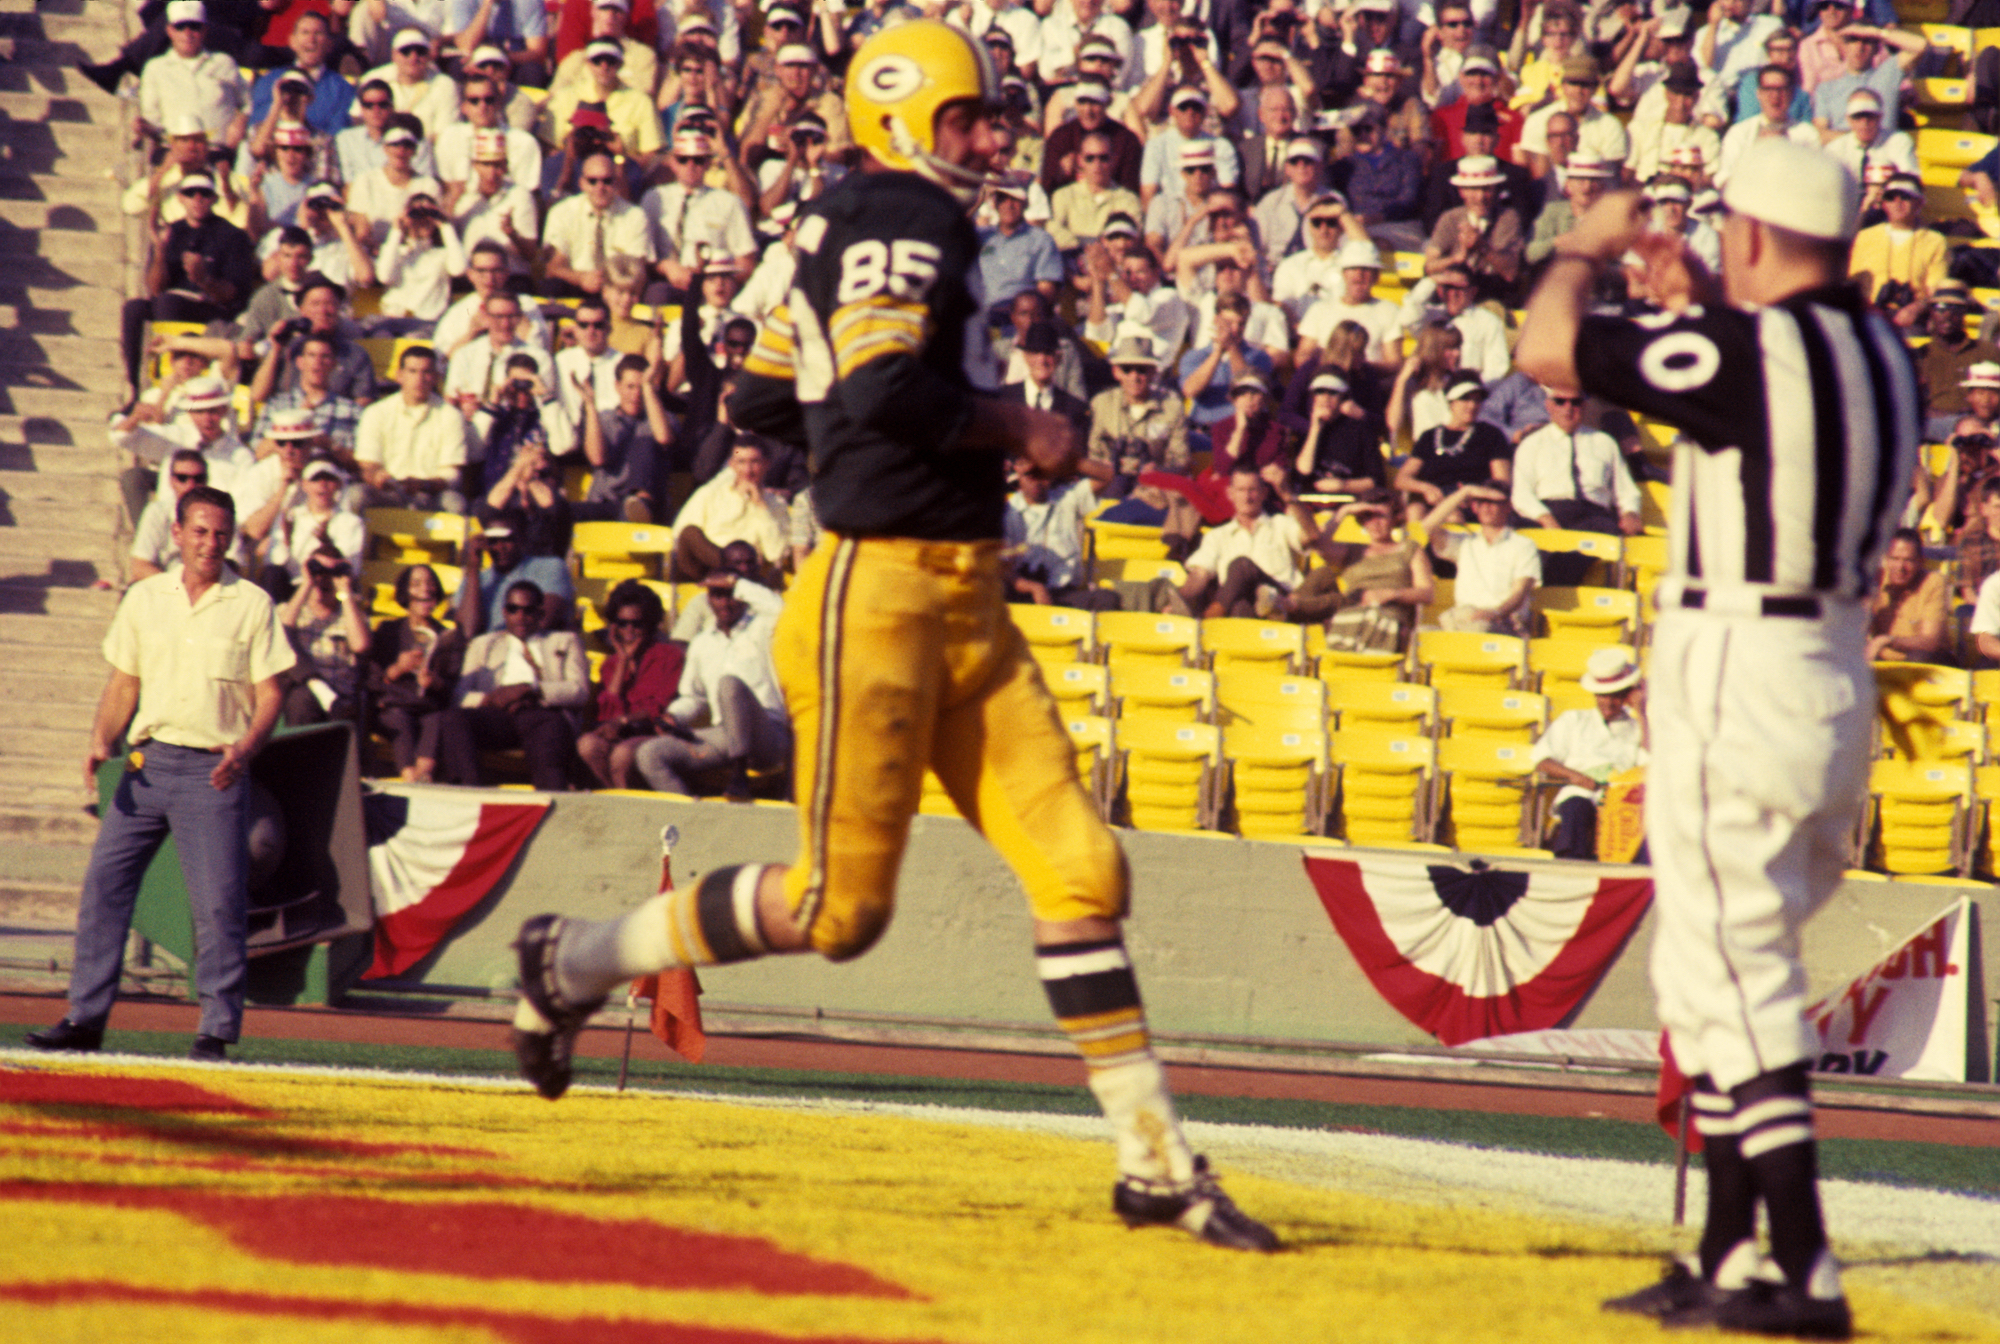 Wide receiver Max McGee, #85 of the Green Bay Packers, scores on a 13-yard touchdown pass from quarterback Bart Starr in the third quarter of Super Bowl I on January 15, 1967, against the Kansas City Chiefs at the Los Angeles Memorial Coliseum in Los Angeles, California.